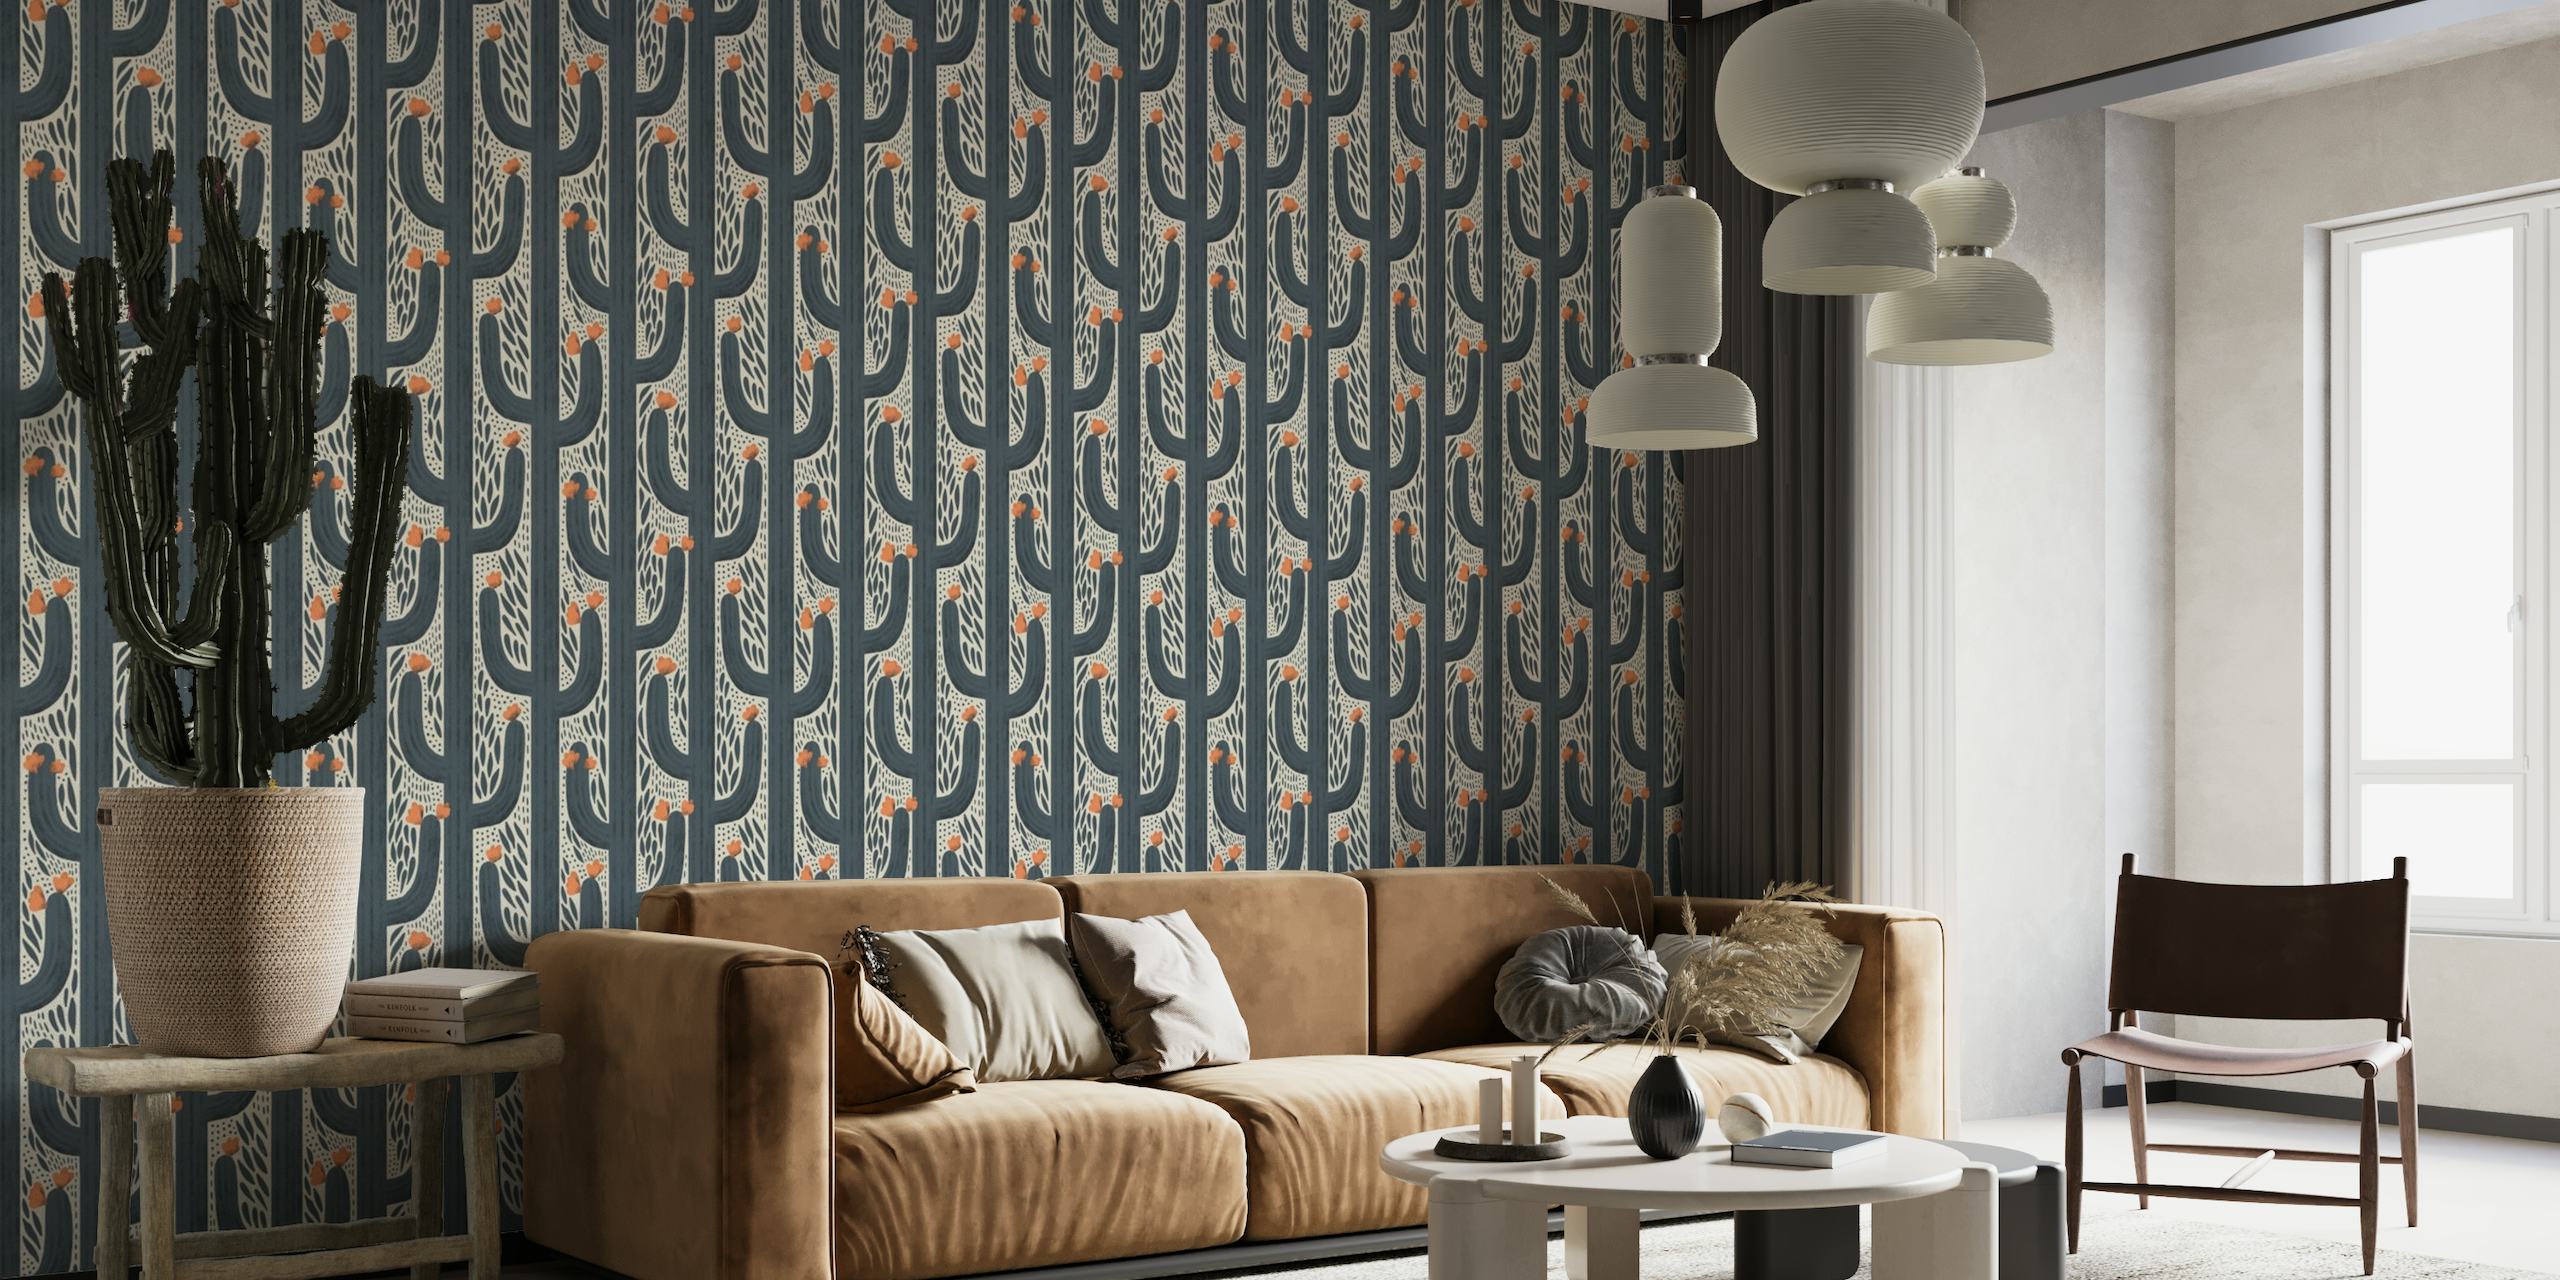 Wyatt navy wall mural with geometric patterns and coral accents